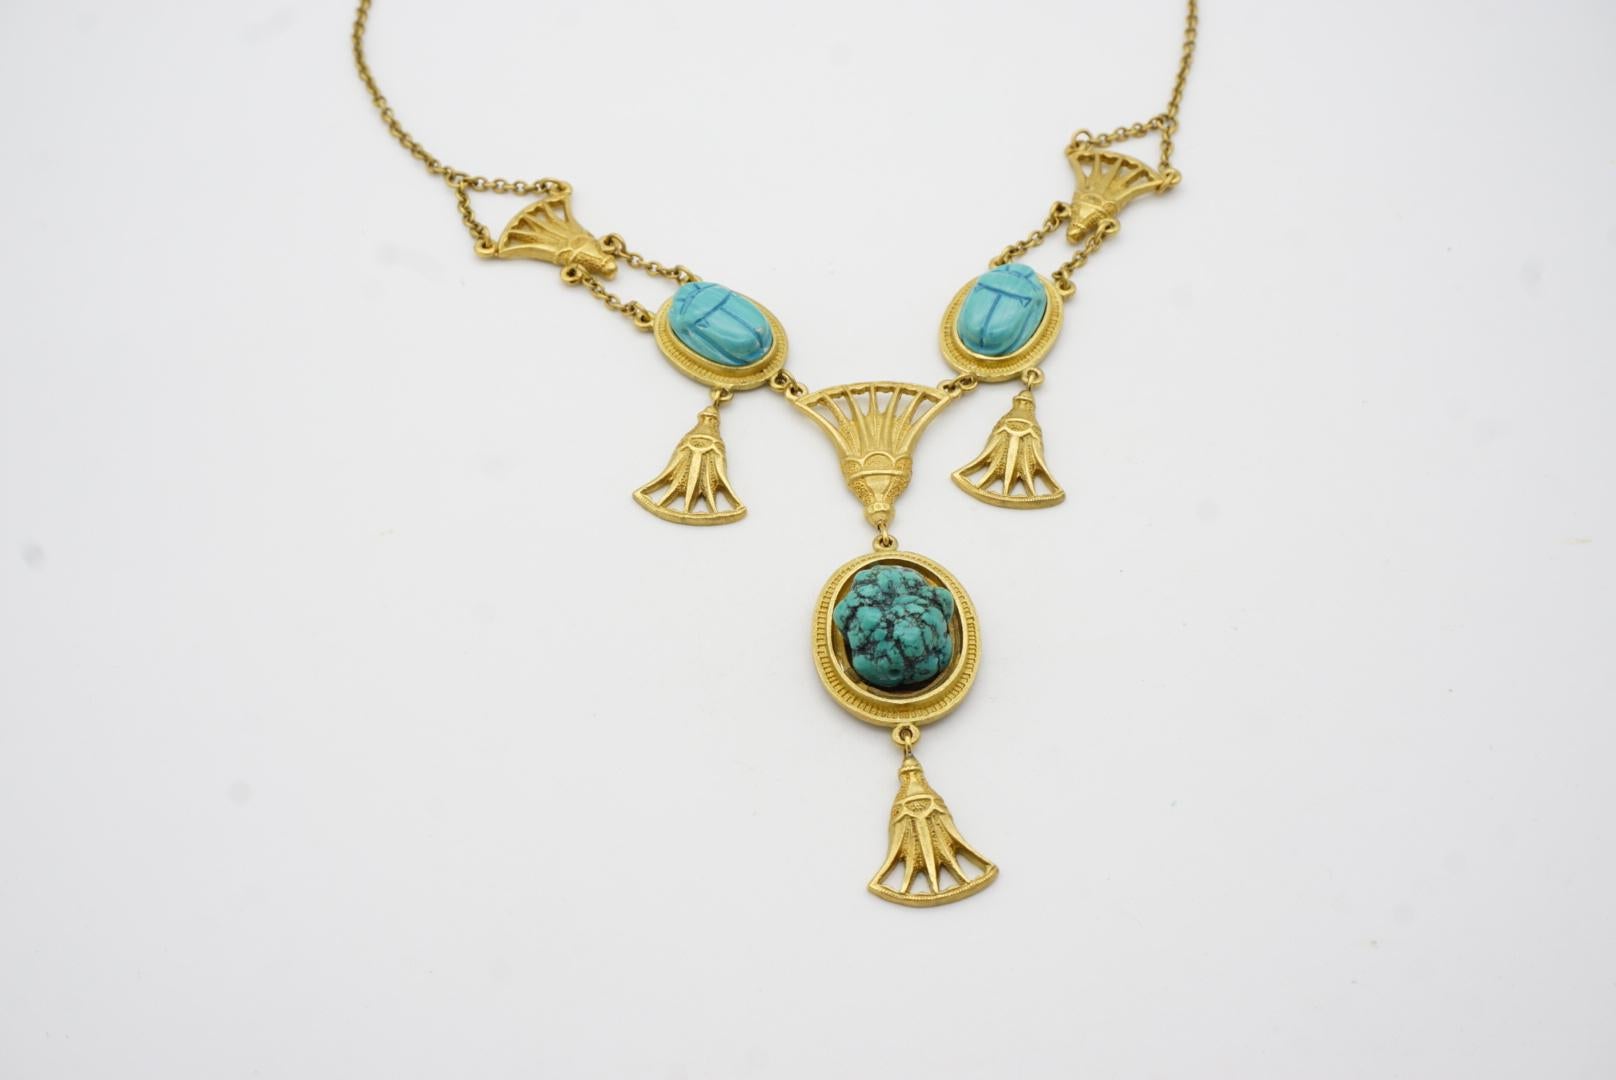 CHRISTIAN DIOR by John Galliano 2004 Egyptian Revival Turquoise Scarab Necklace For Sale 5